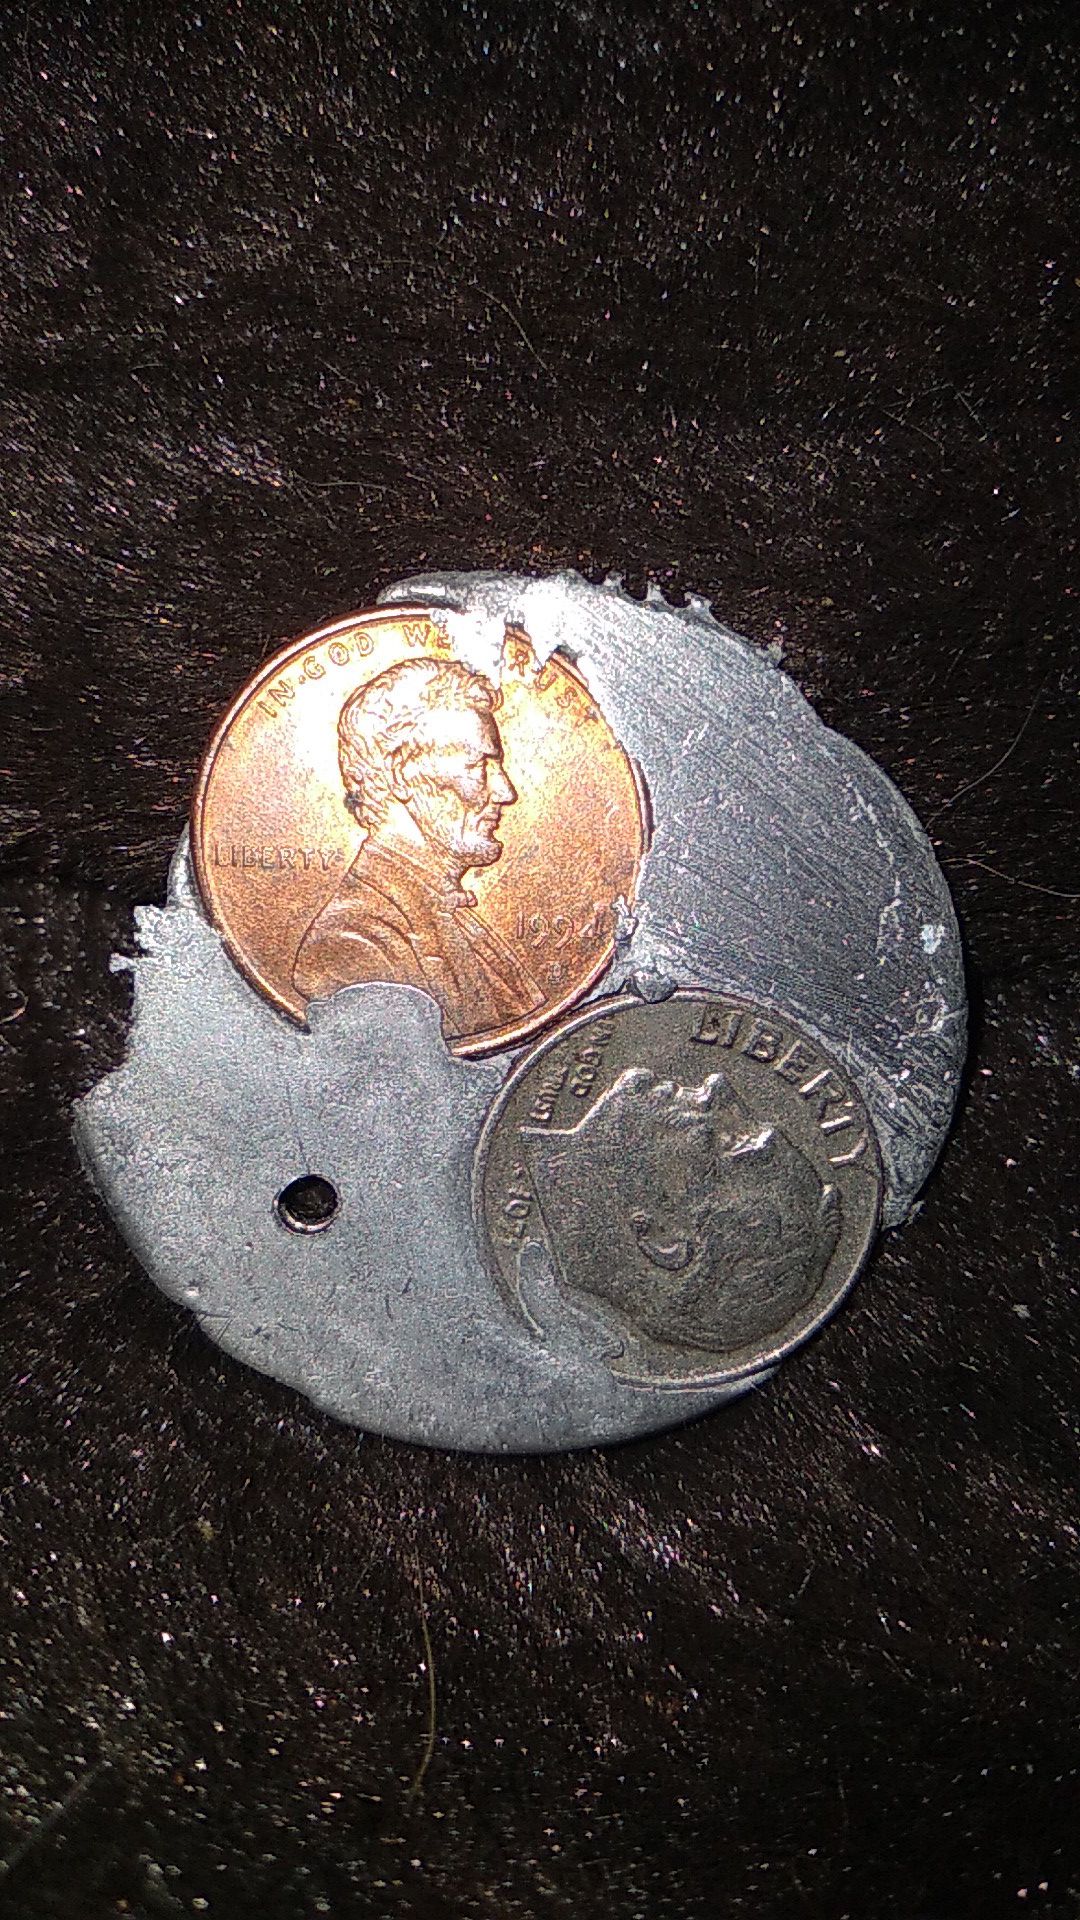 1971 Dime w/errors and 1994 D penny sealed in silver based metals!!!